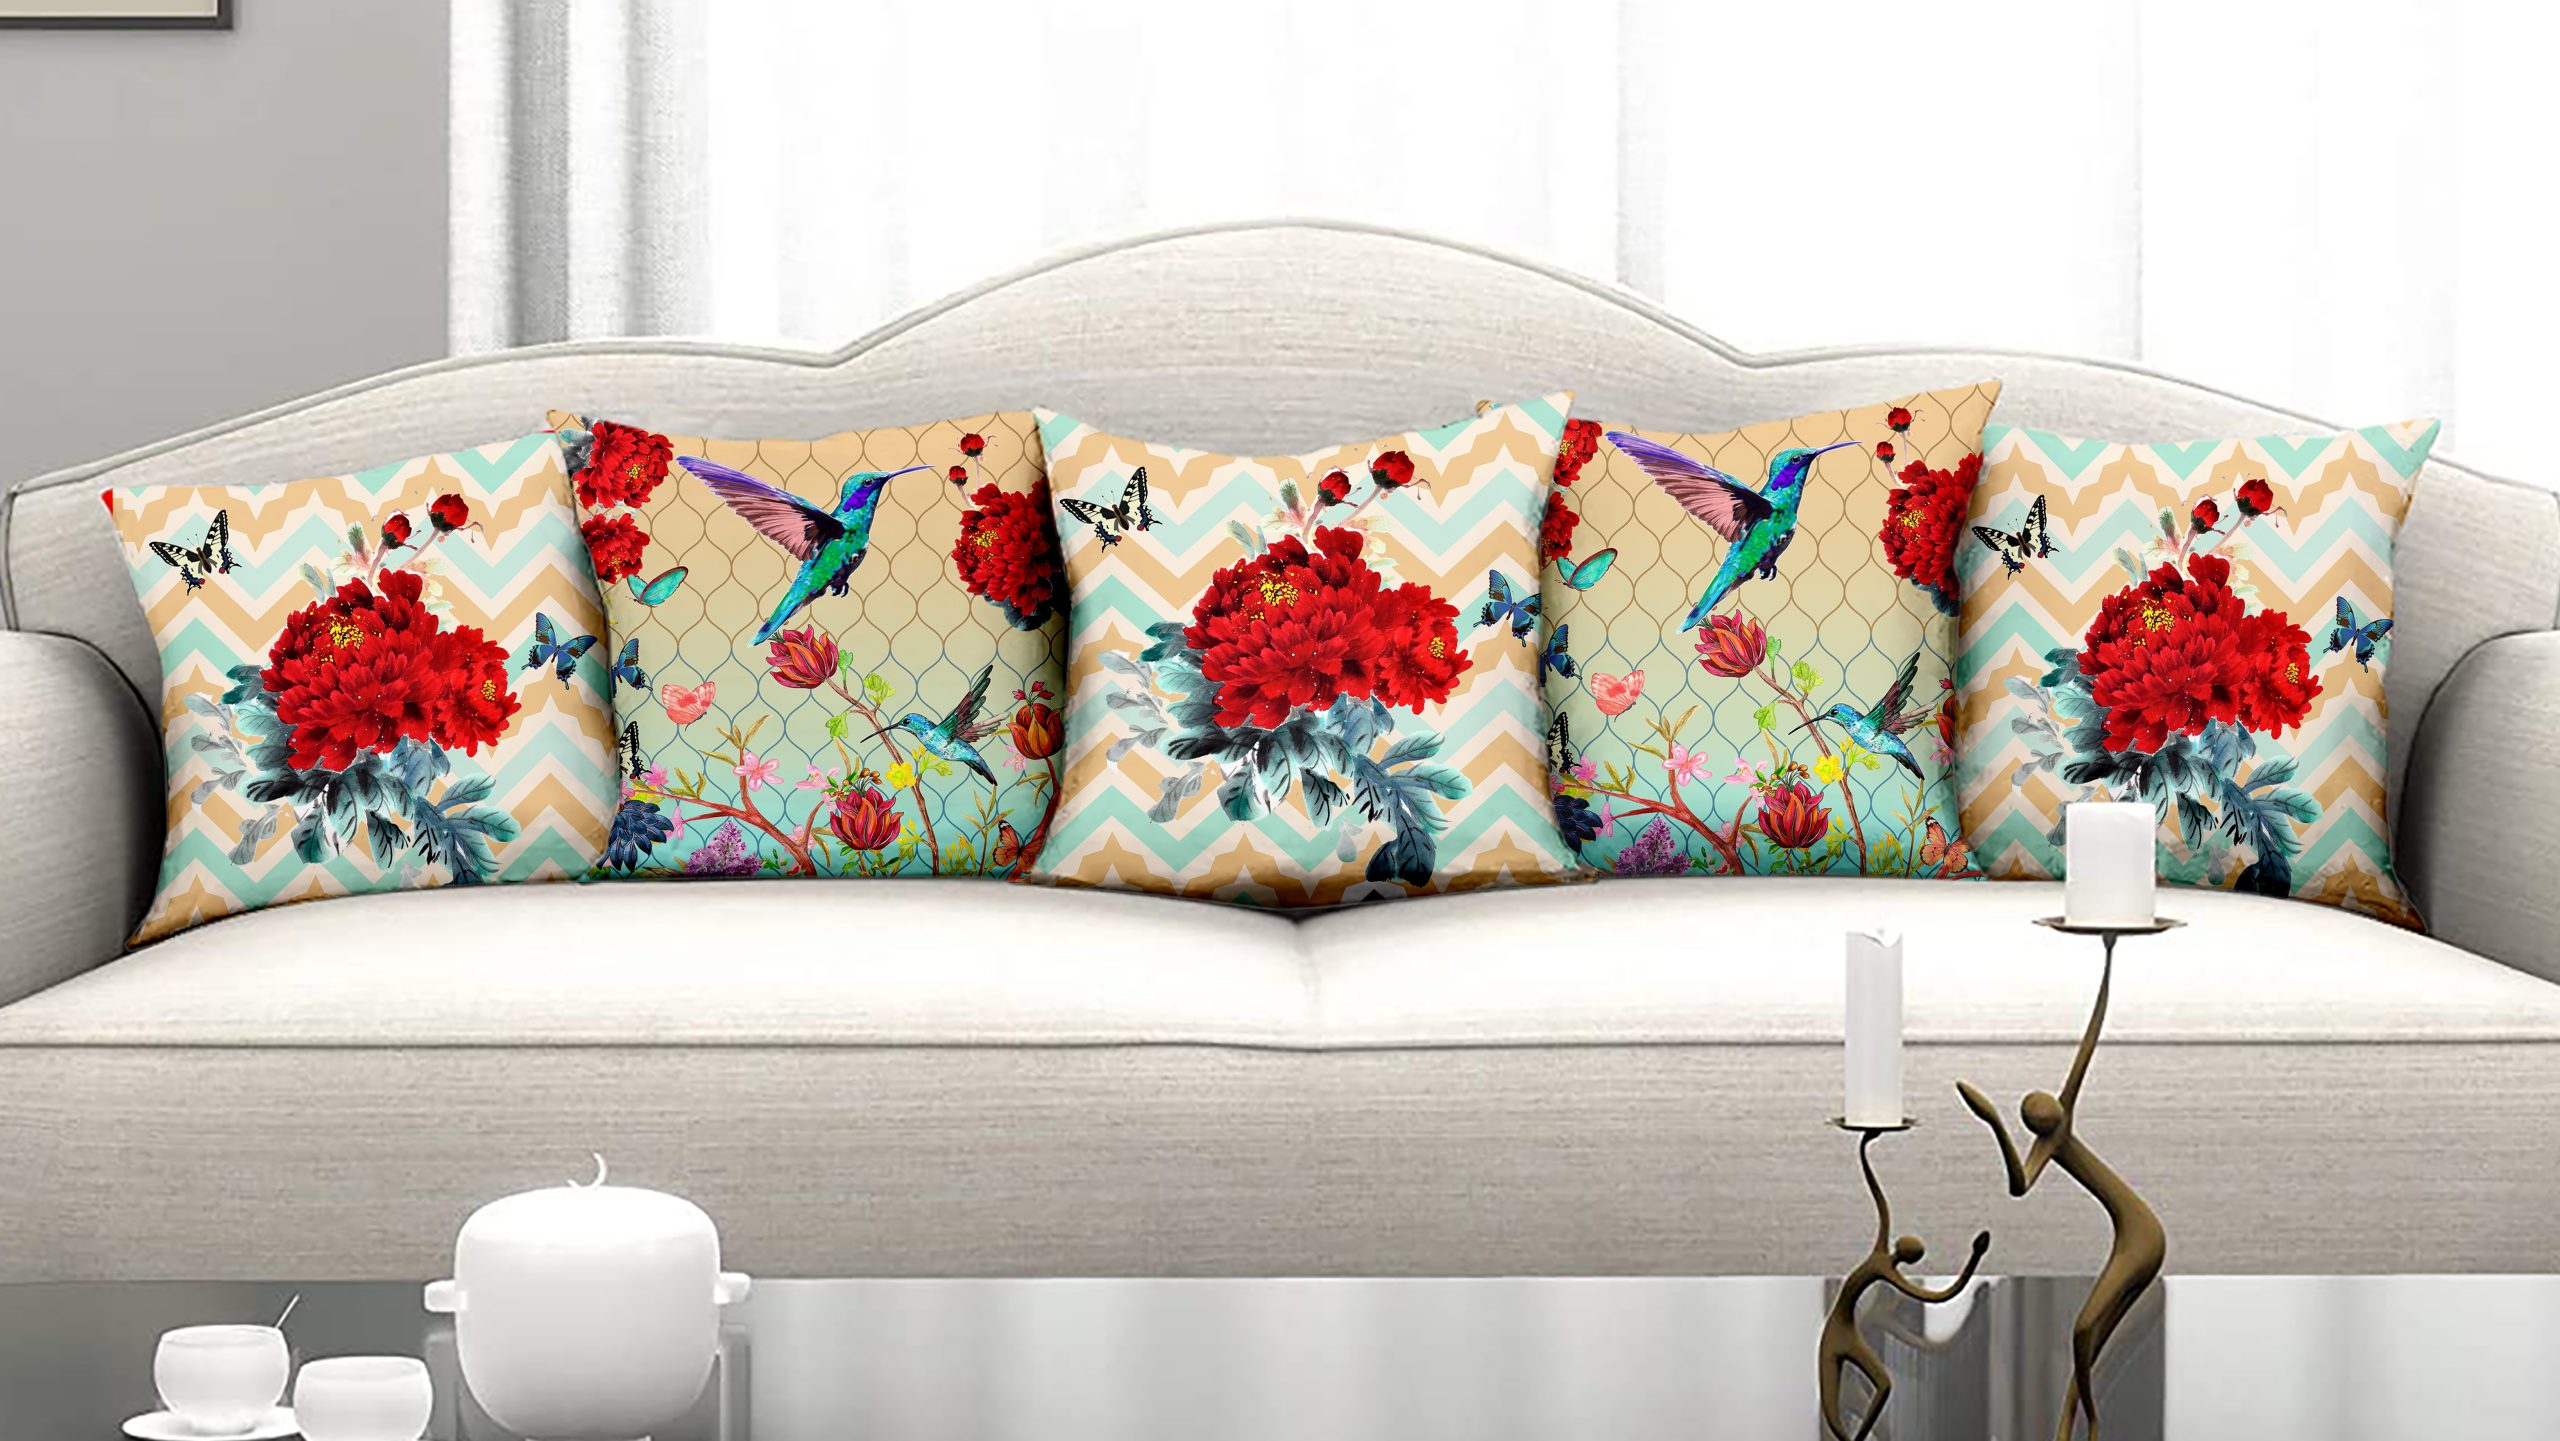 Homewards Humming Bird and Floral Cushion Cover Set of 5 Poly Satin, Multicolor